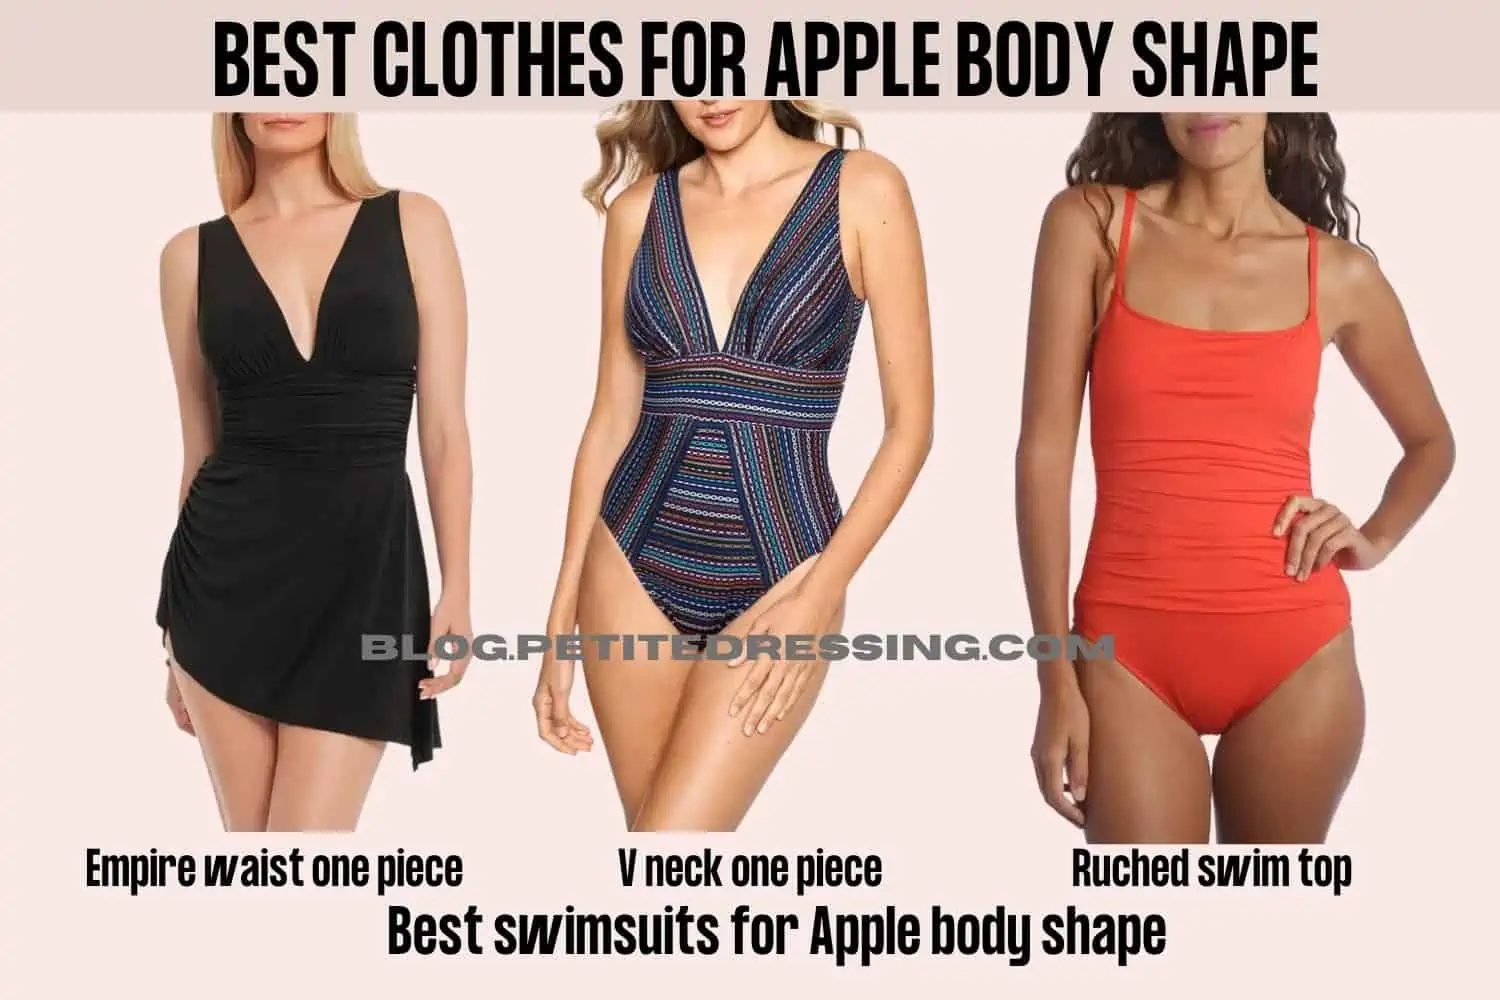 Apple Shaped Body: The Ultimate Styling Guide - Petite Dressing